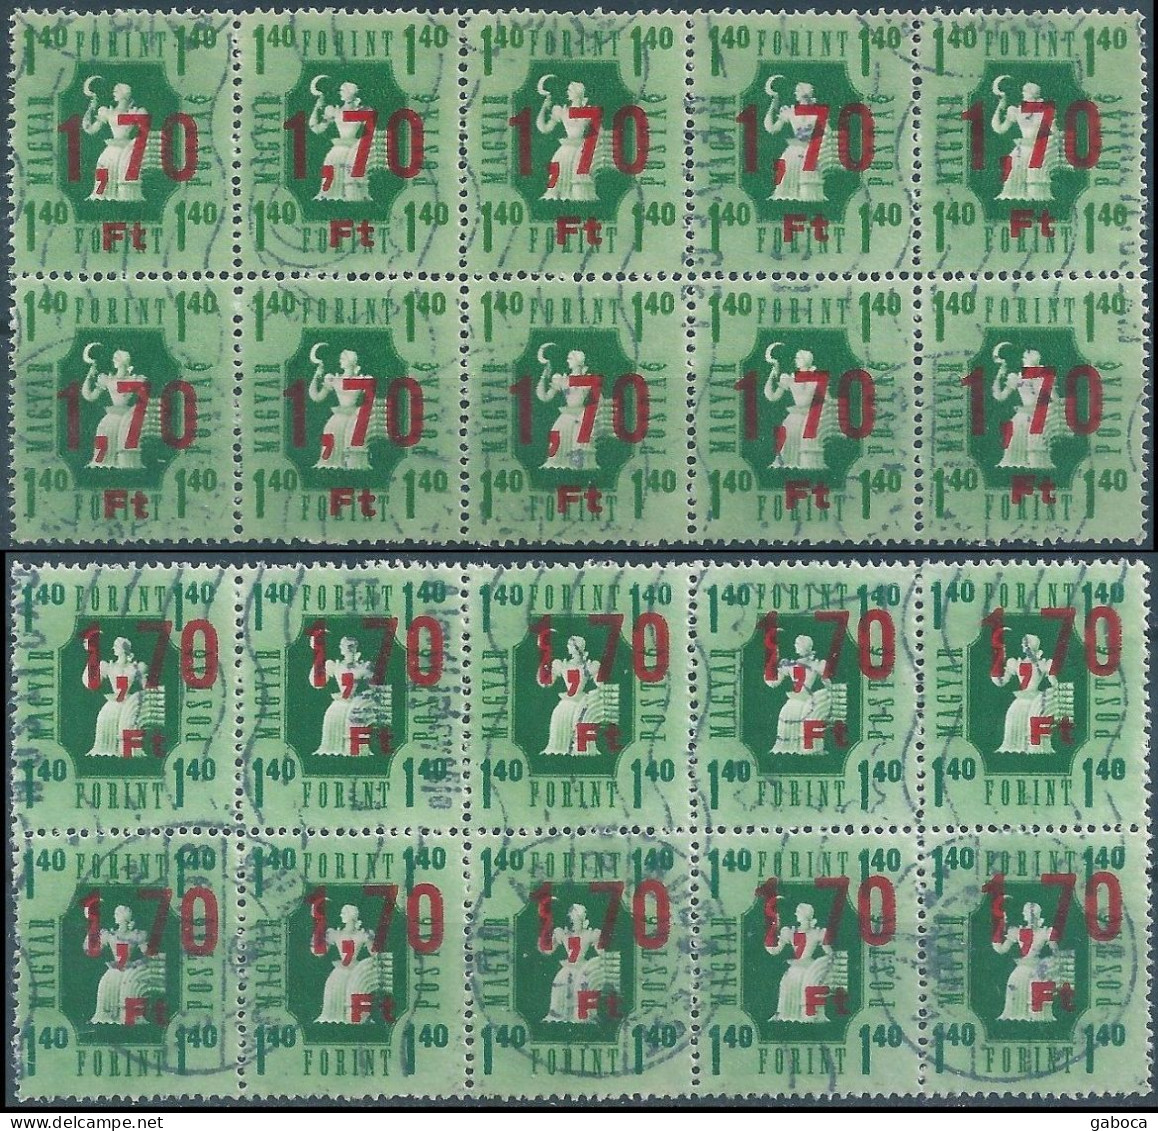 C5899 Hungary Parcel Stamp Agriculture Harvest Ovprnt Plate Block Of 10 Used 2xERROR - Correo Postal